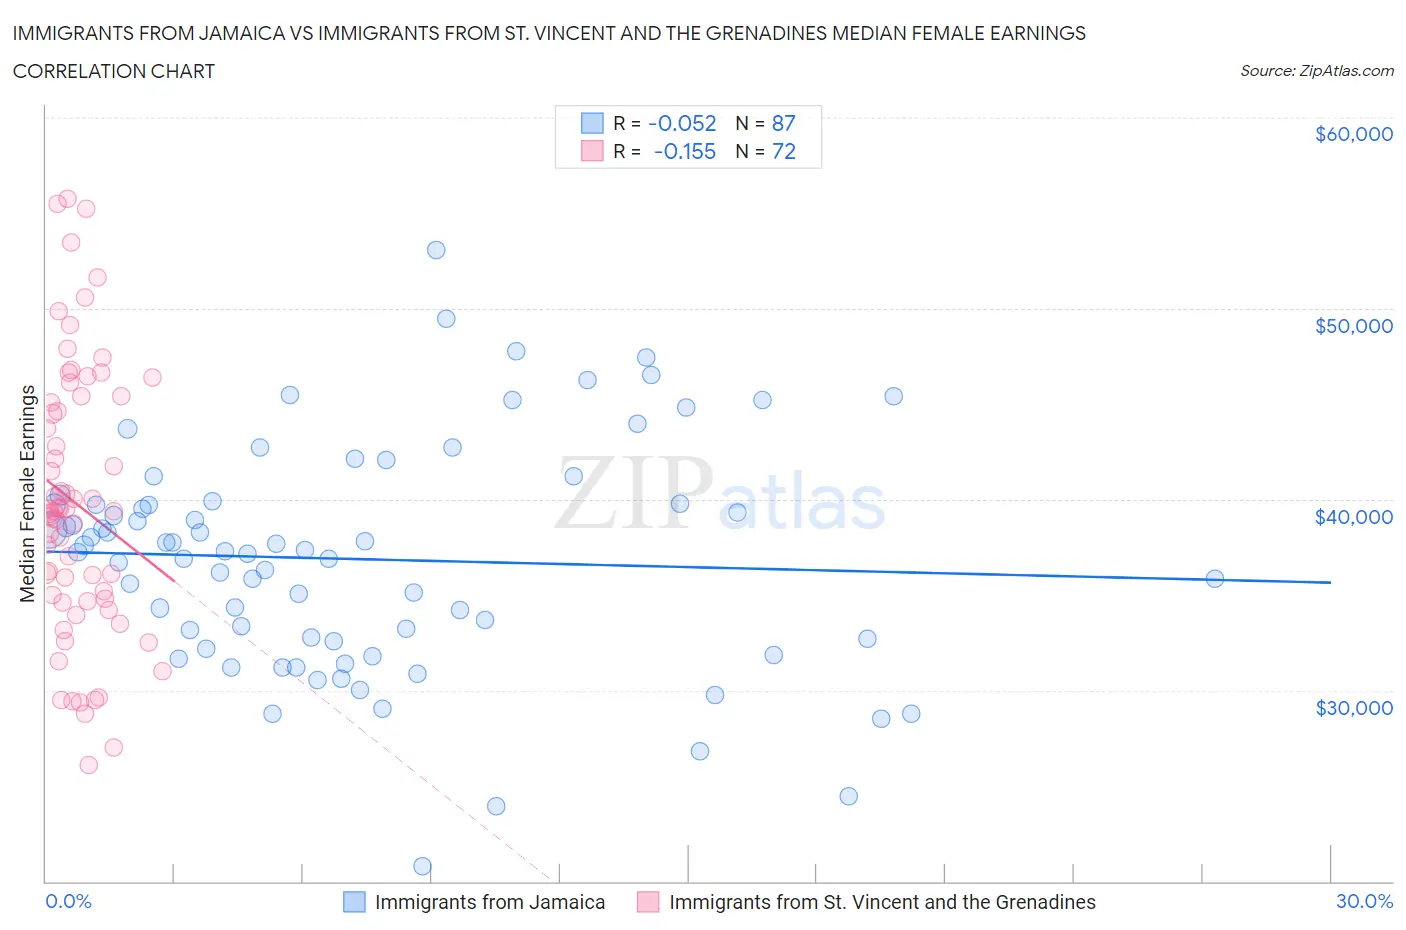 Immigrants from Jamaica vs Immigrants from St. Vincent and the Grenadines Median Female Earnings